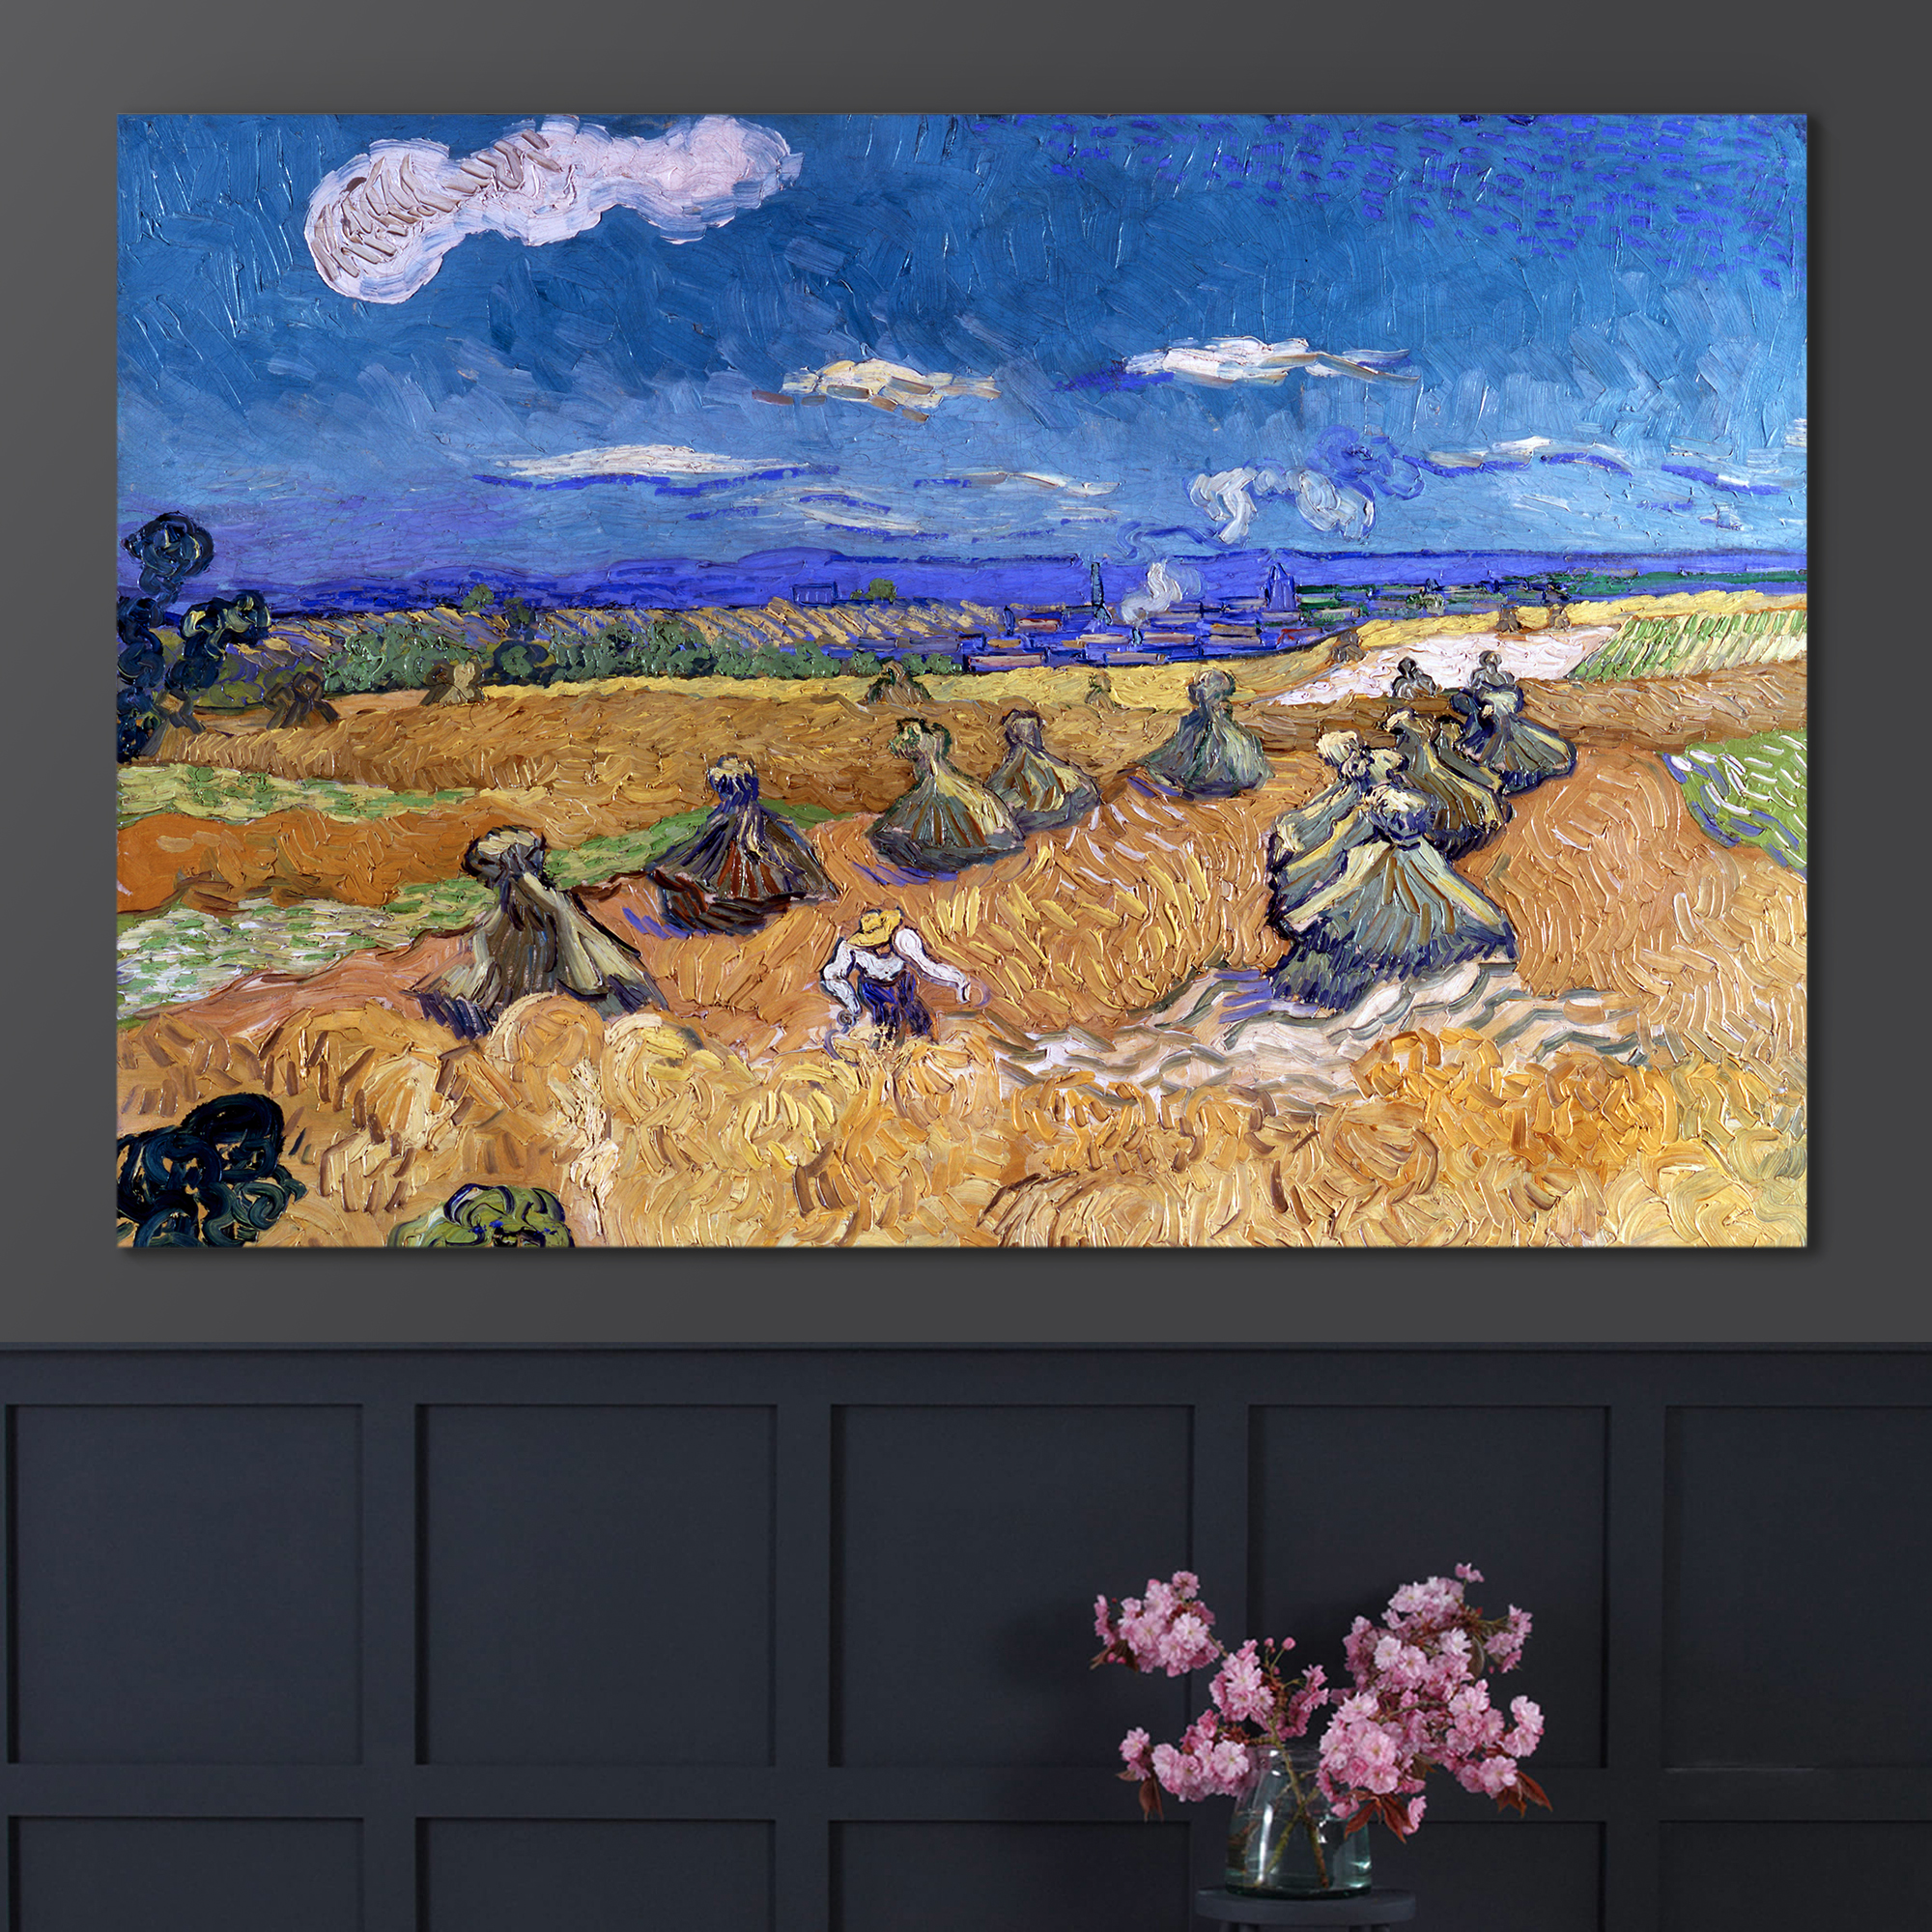 Wheat Fields with Reaper, Auvers by Vincent Van Gogh - Oil Painting Reproduction on Canvas Prints Wall Art, Ready to Hang - 16x24 inches